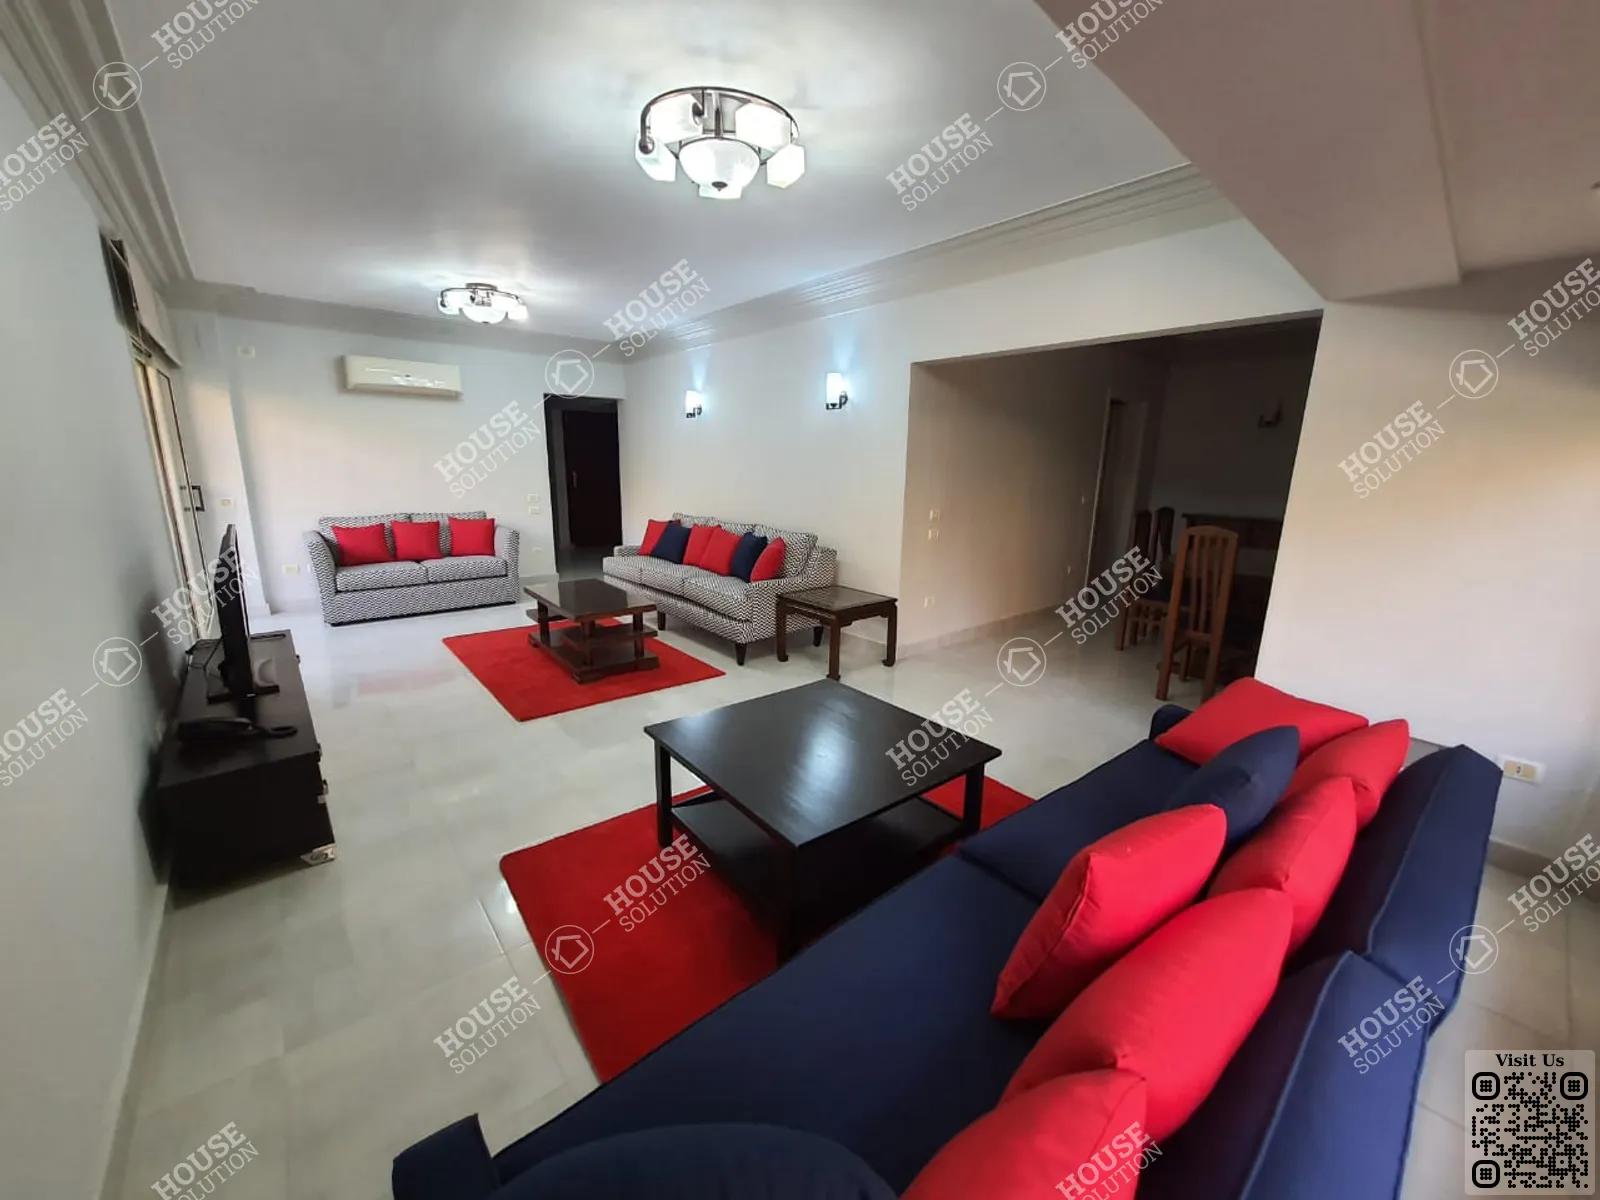 RECEPTION  @ Apartments For Rent In Maadi Maadi Degla Area: 300 m² consists of 4 Bedrooms 3 Bathrooms Modern furnished 5 stars #5564-0